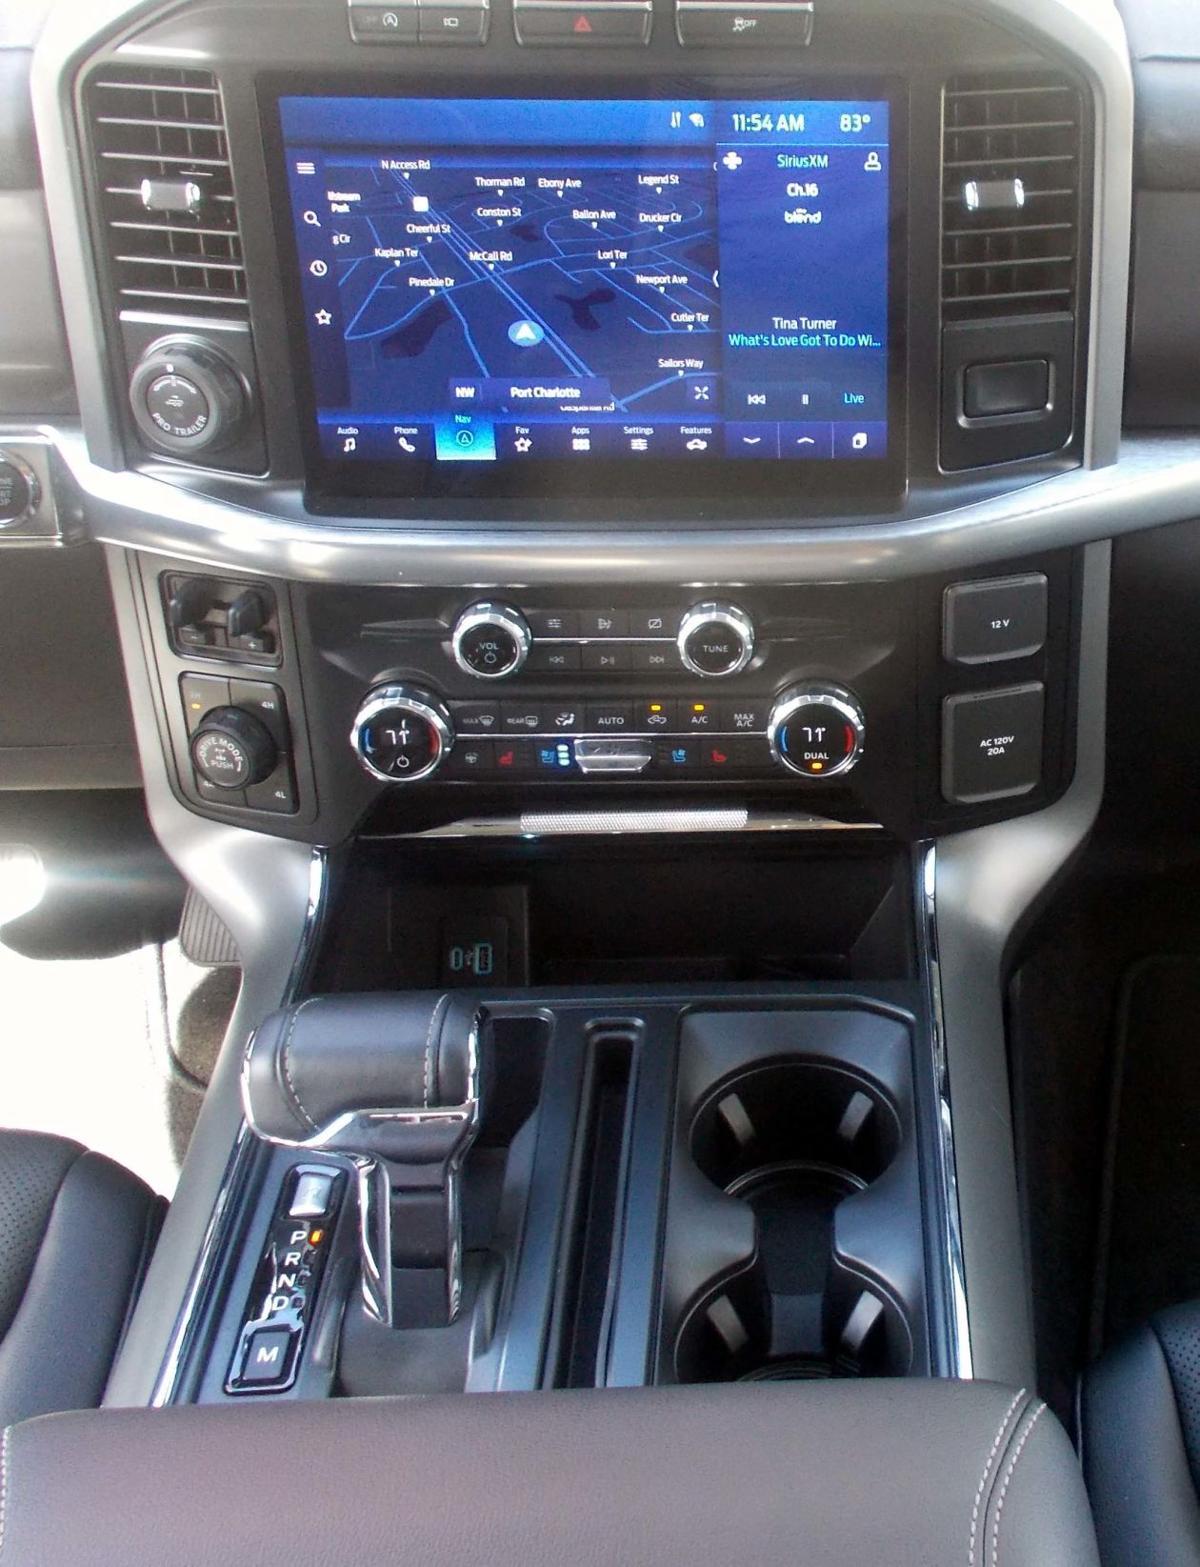 2021 Ford F150 Lariat center console.jpg